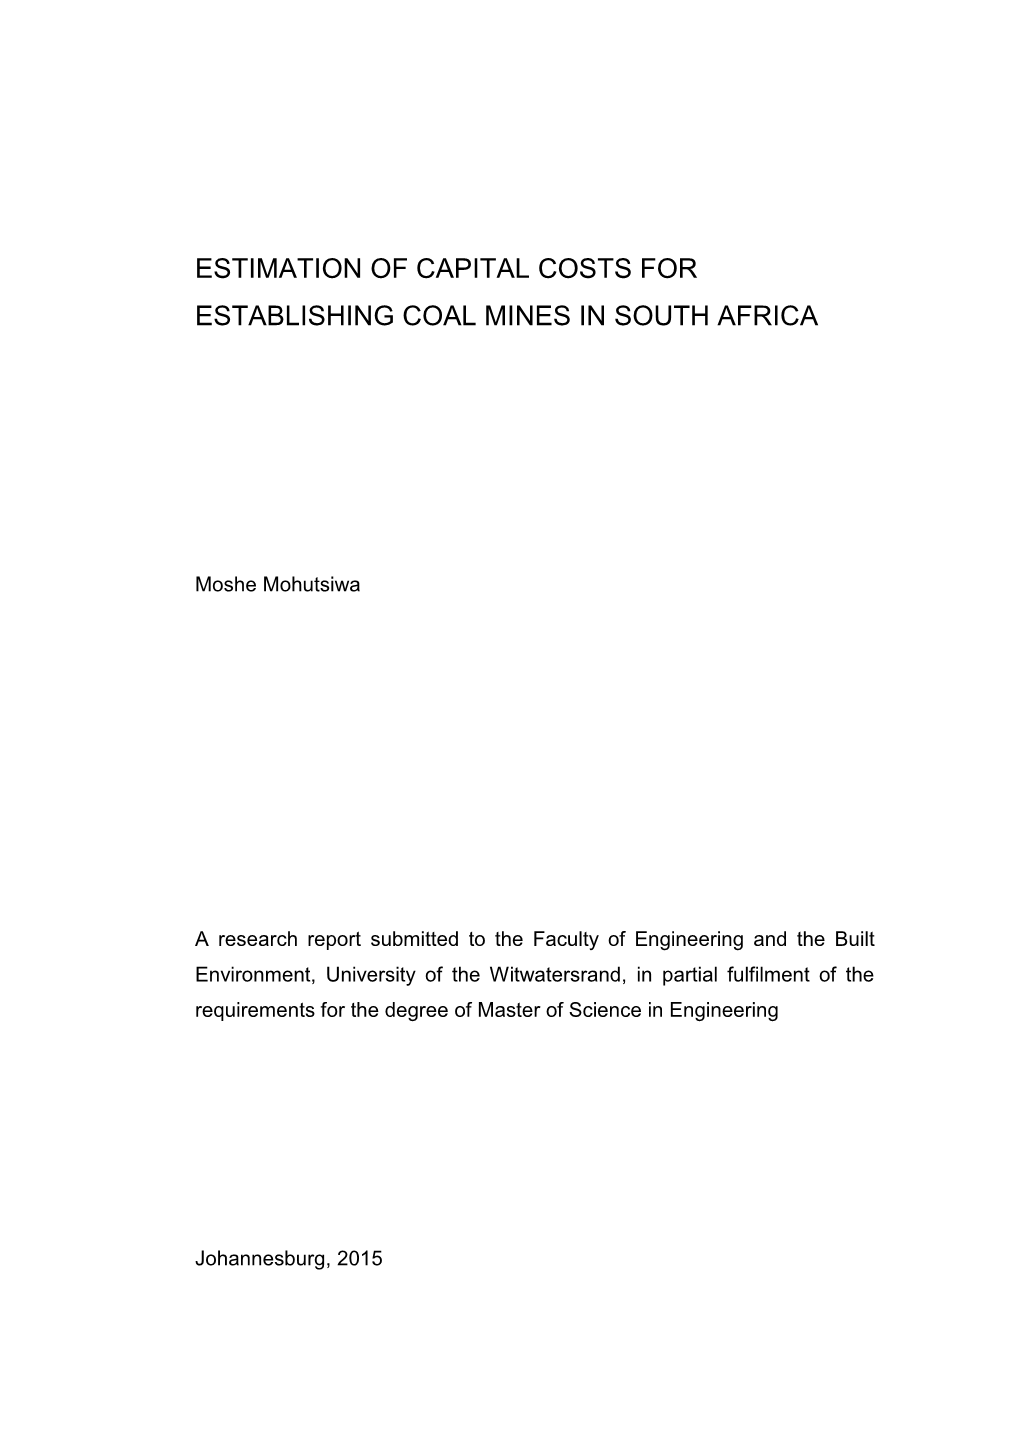 Estimation of Capital Costs for Establishing Coal Mines in South Africa